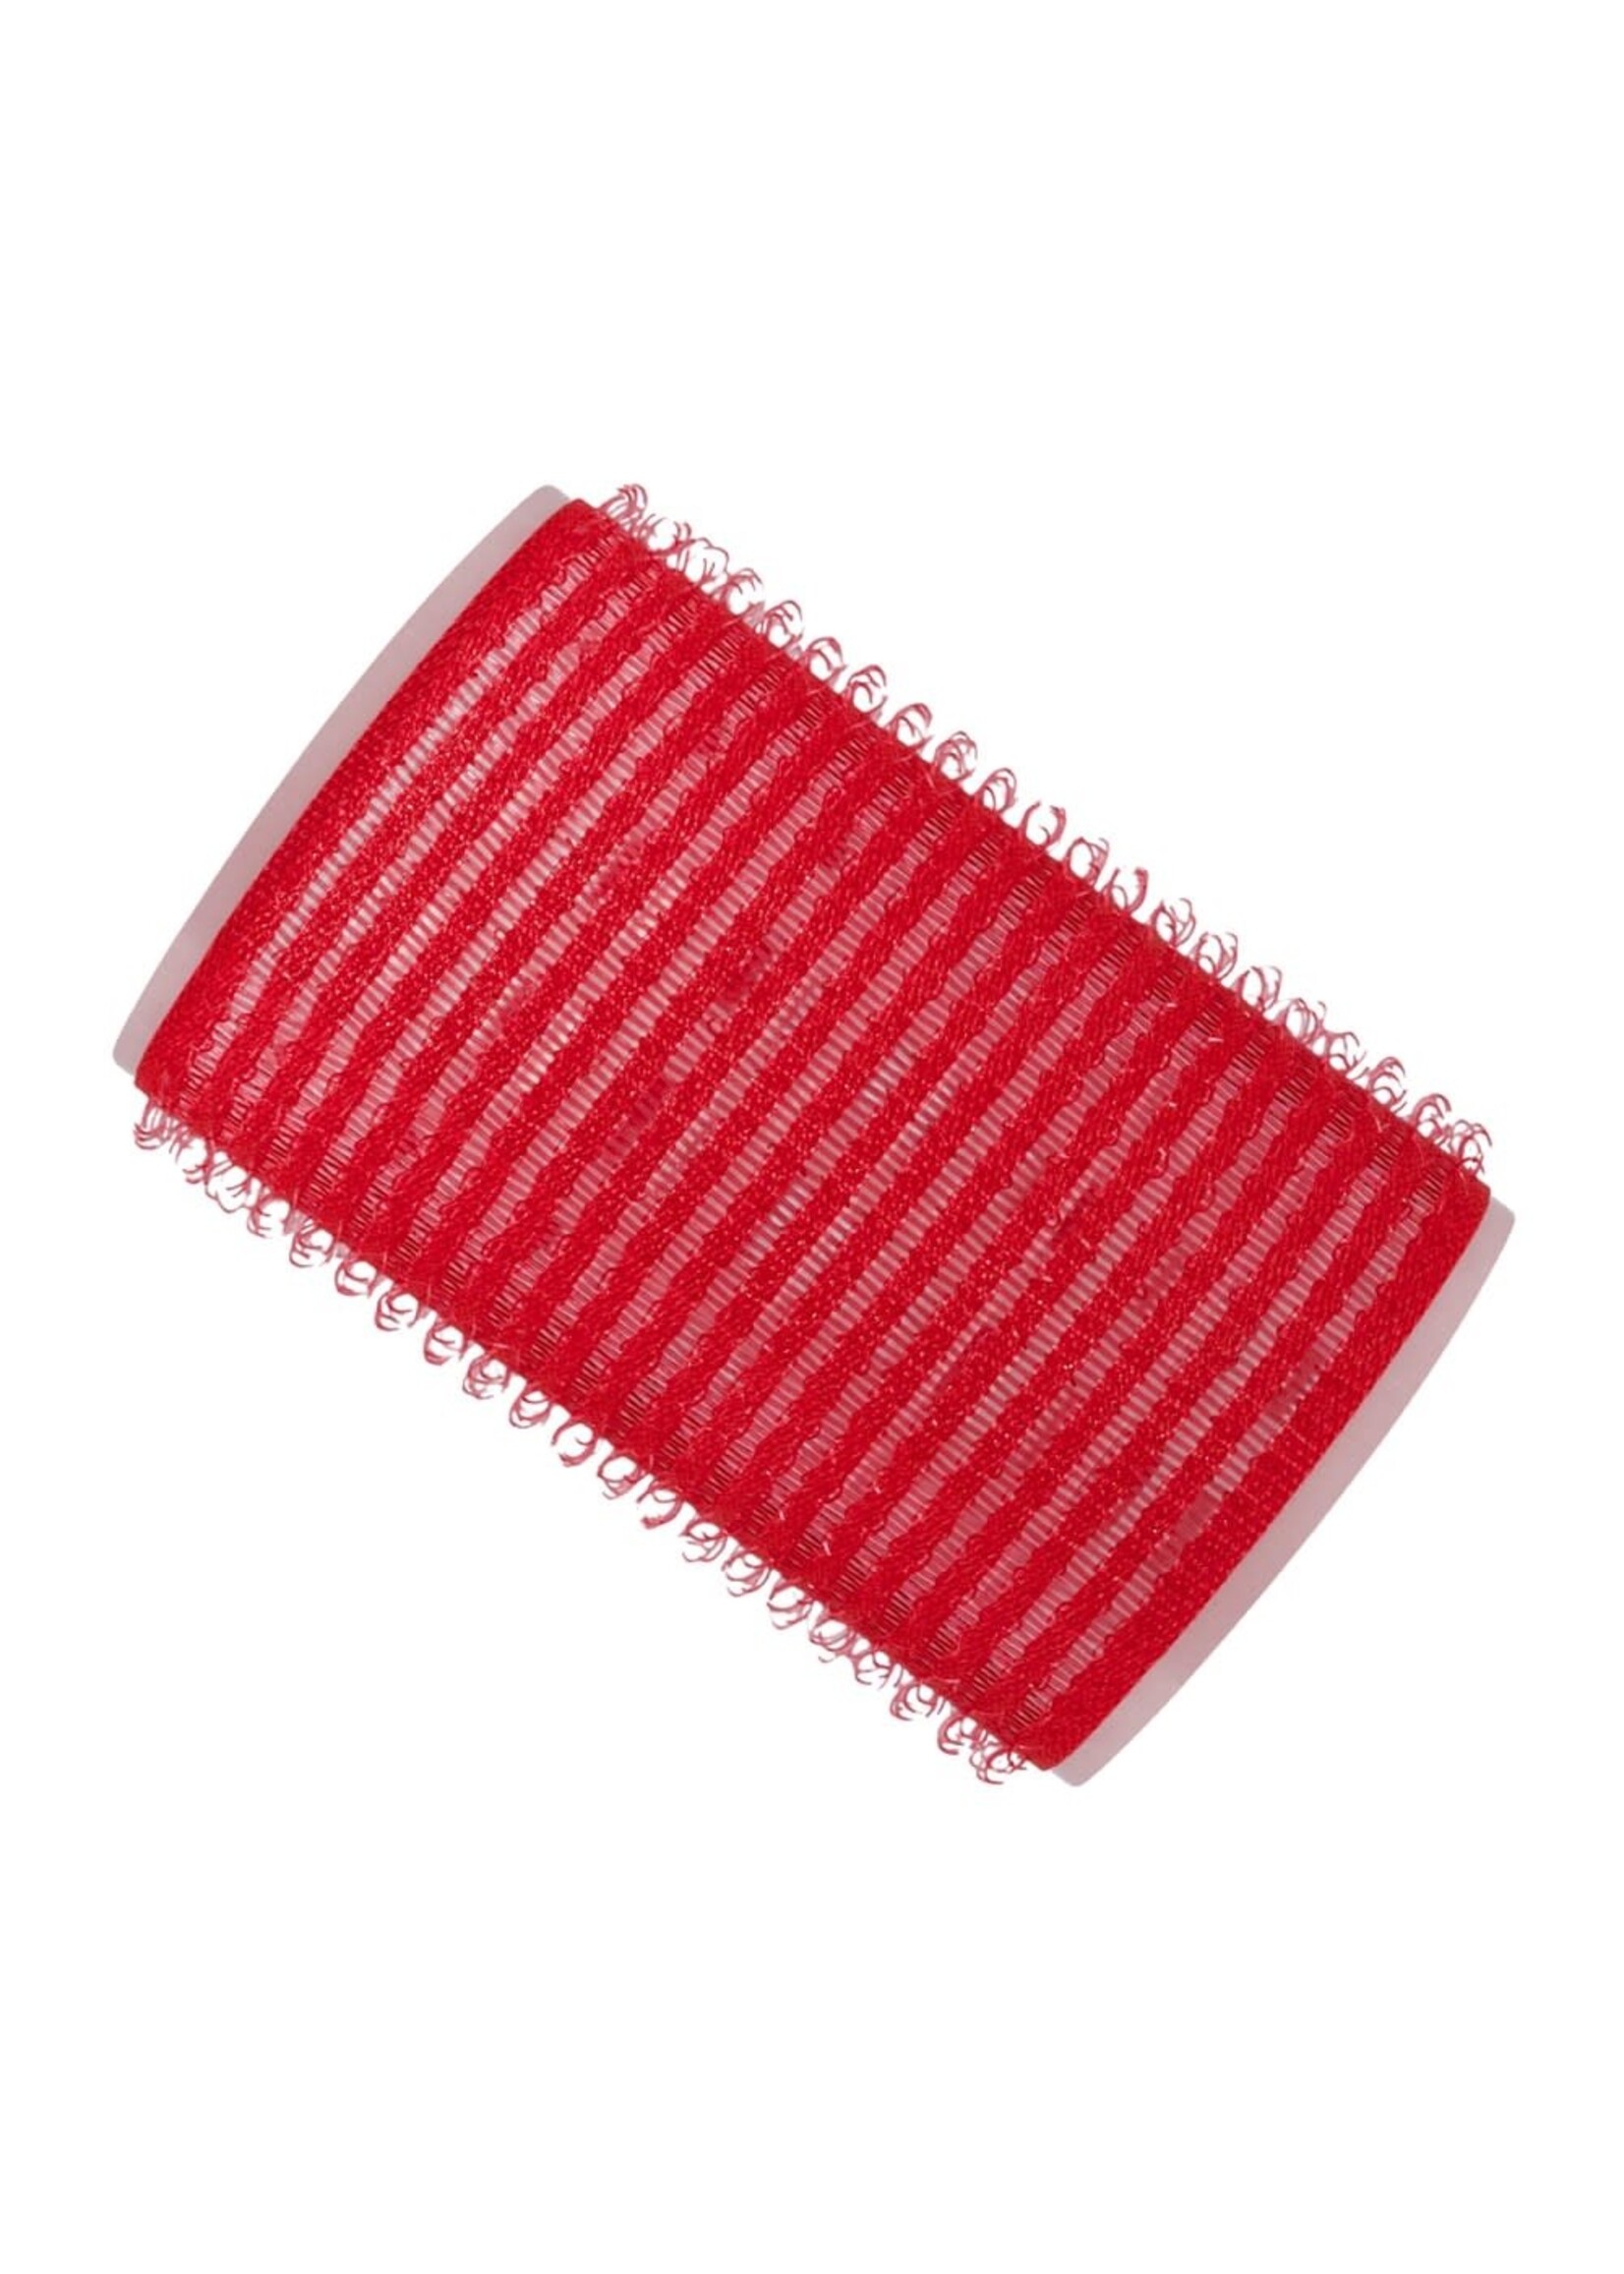 Hair FX Hair FX Self-Gripping Velcro Rollers 36mm Red 6pk